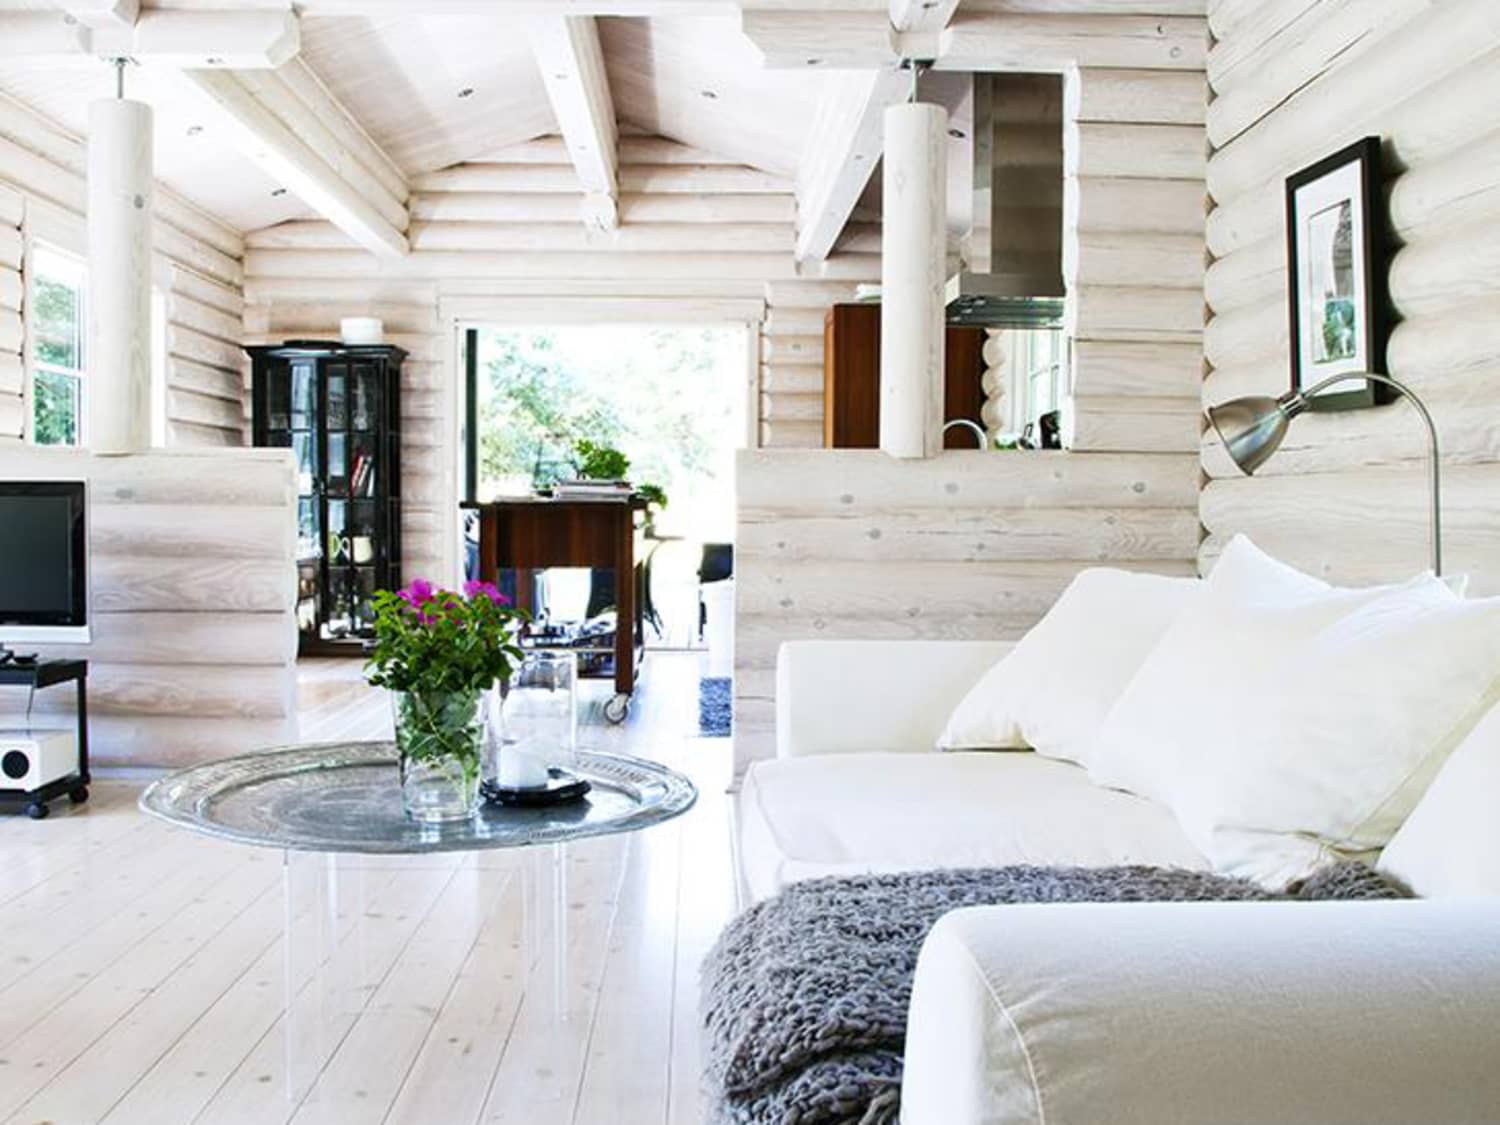 Cozy Modern Cabins   Apartment Therapy